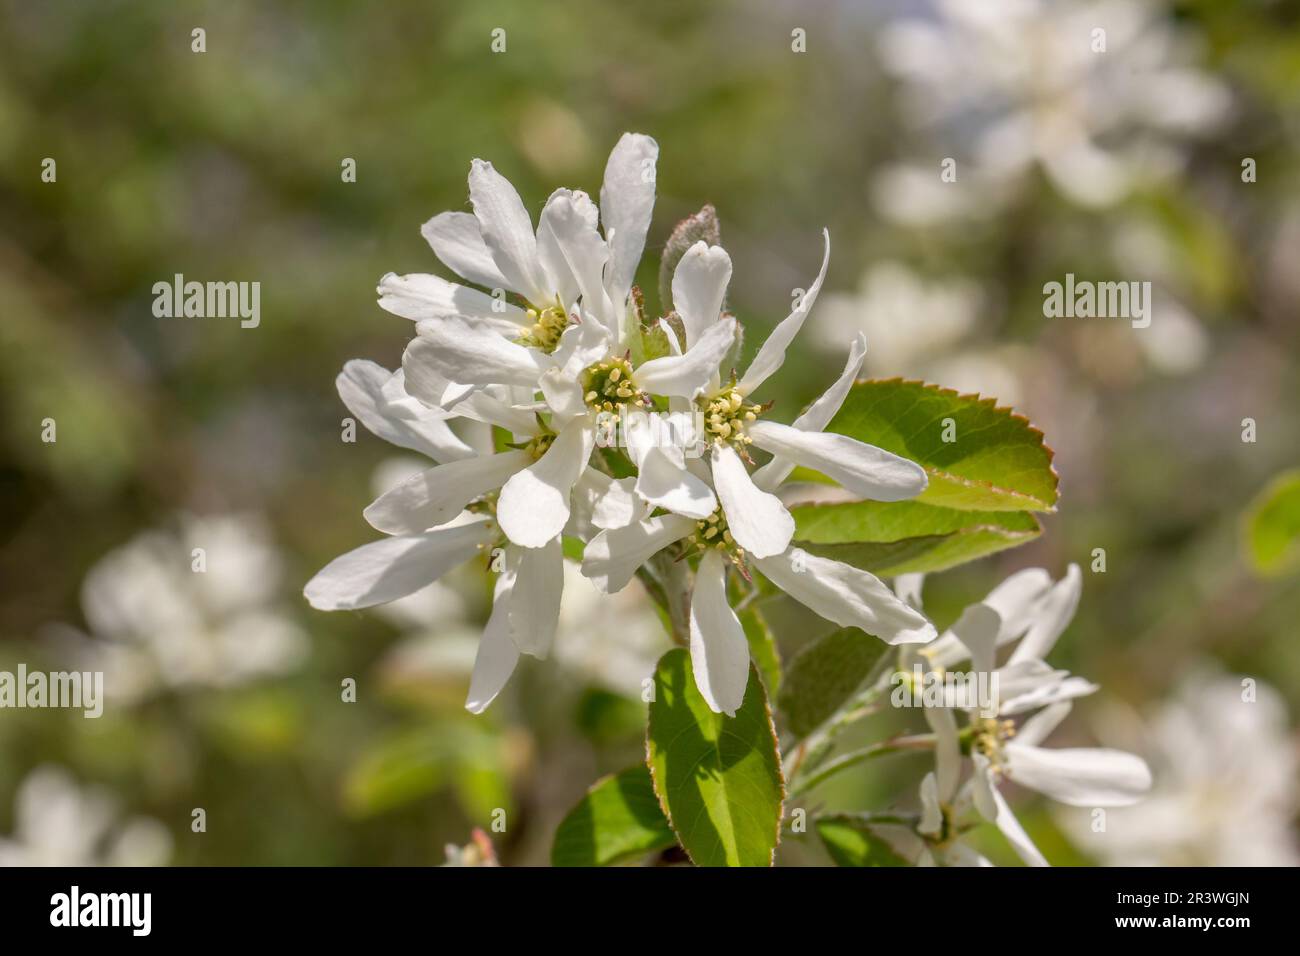 Amelanchier ovalis, common names are Snowy mespilus, Garden serviceberry and Grape pear Stock Photo